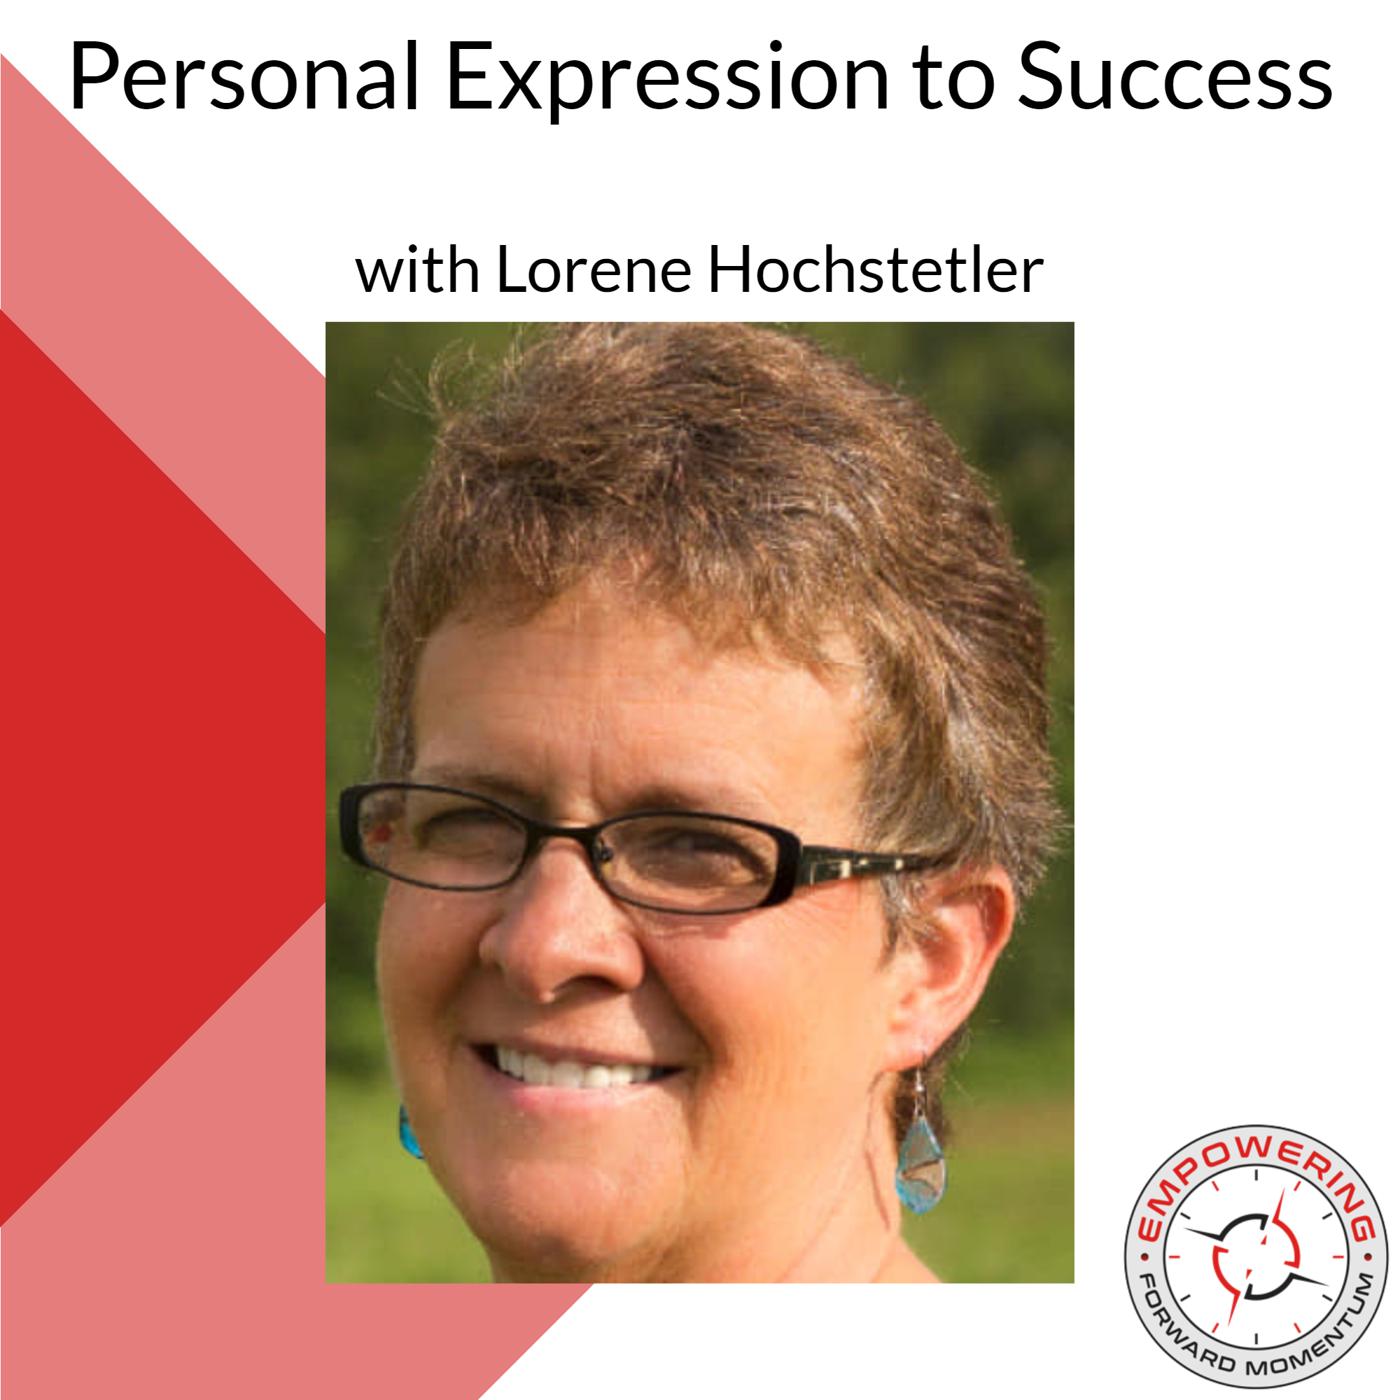 Personal Expression to Success - with Lorene Hochstetler